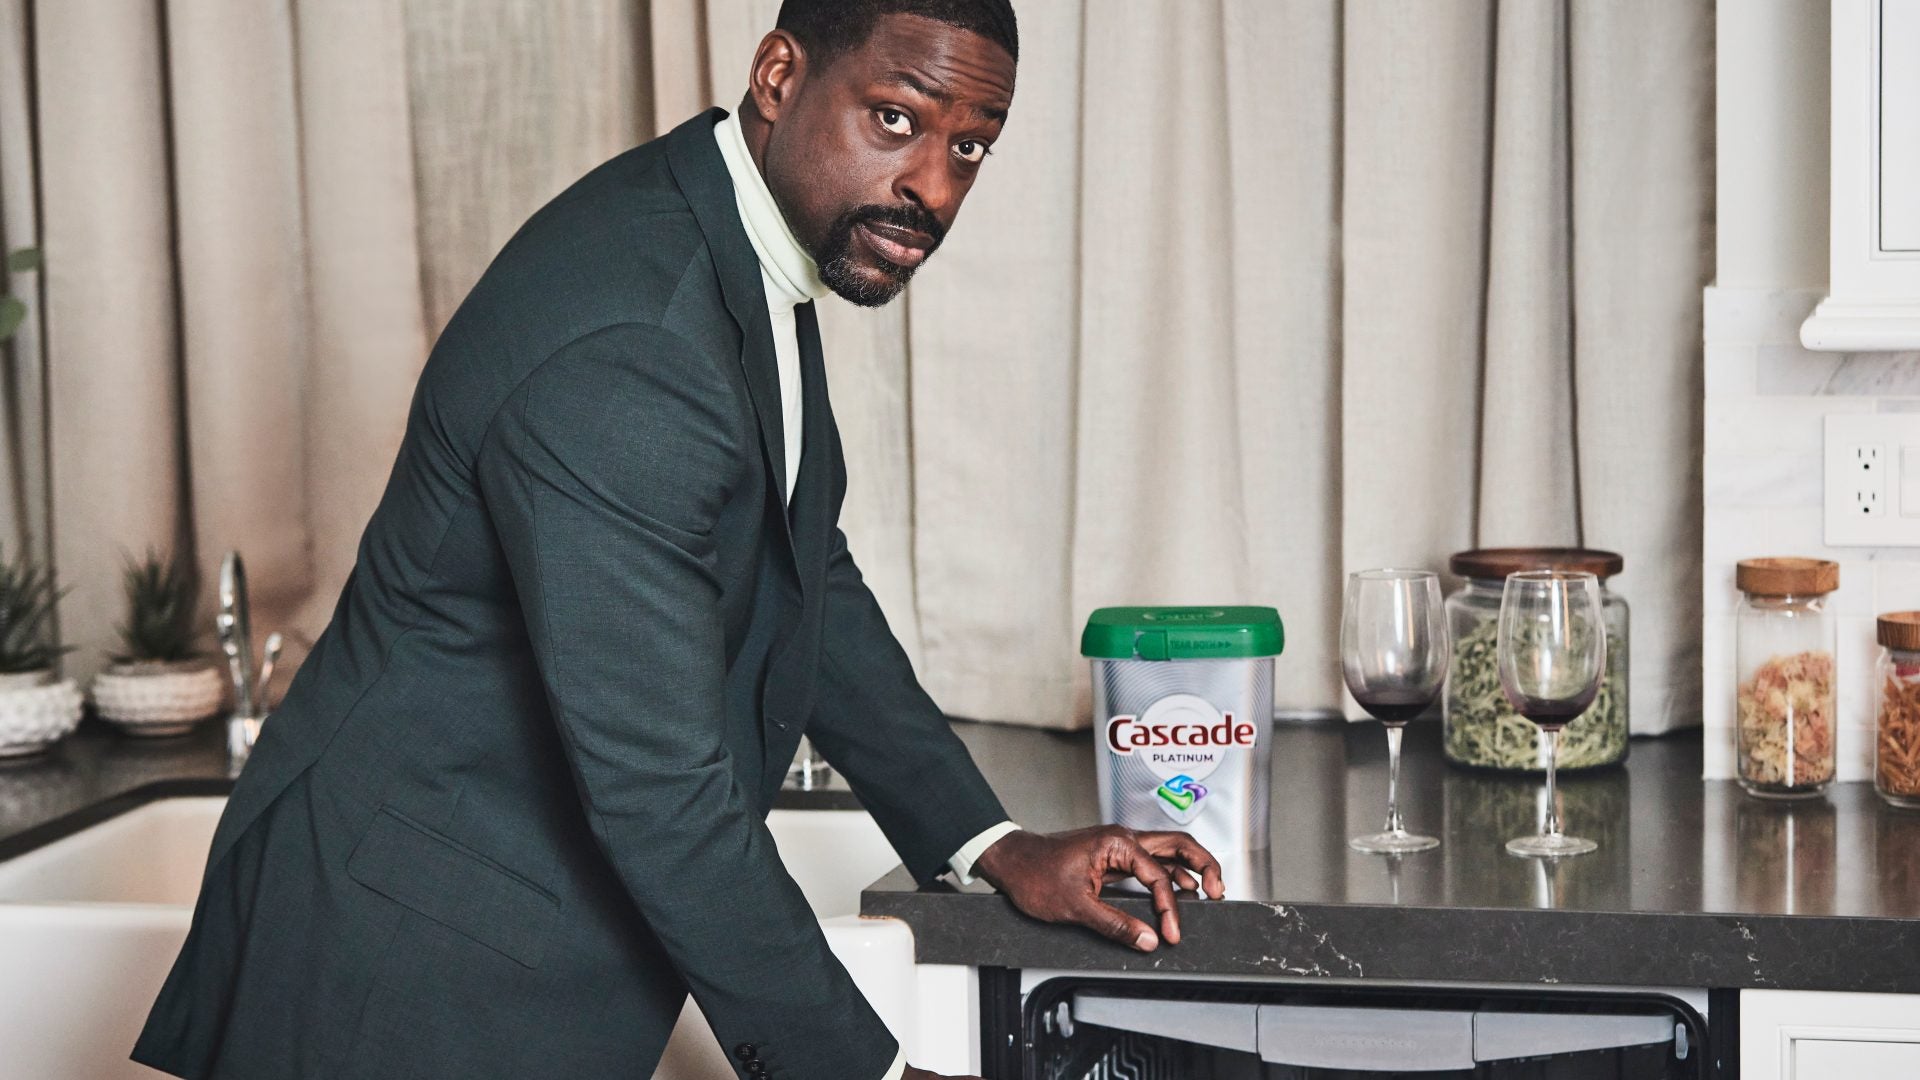 Sterling K. Brown On 'This Is Us' Ending And Shifting The Narrative About Black Fatherhood